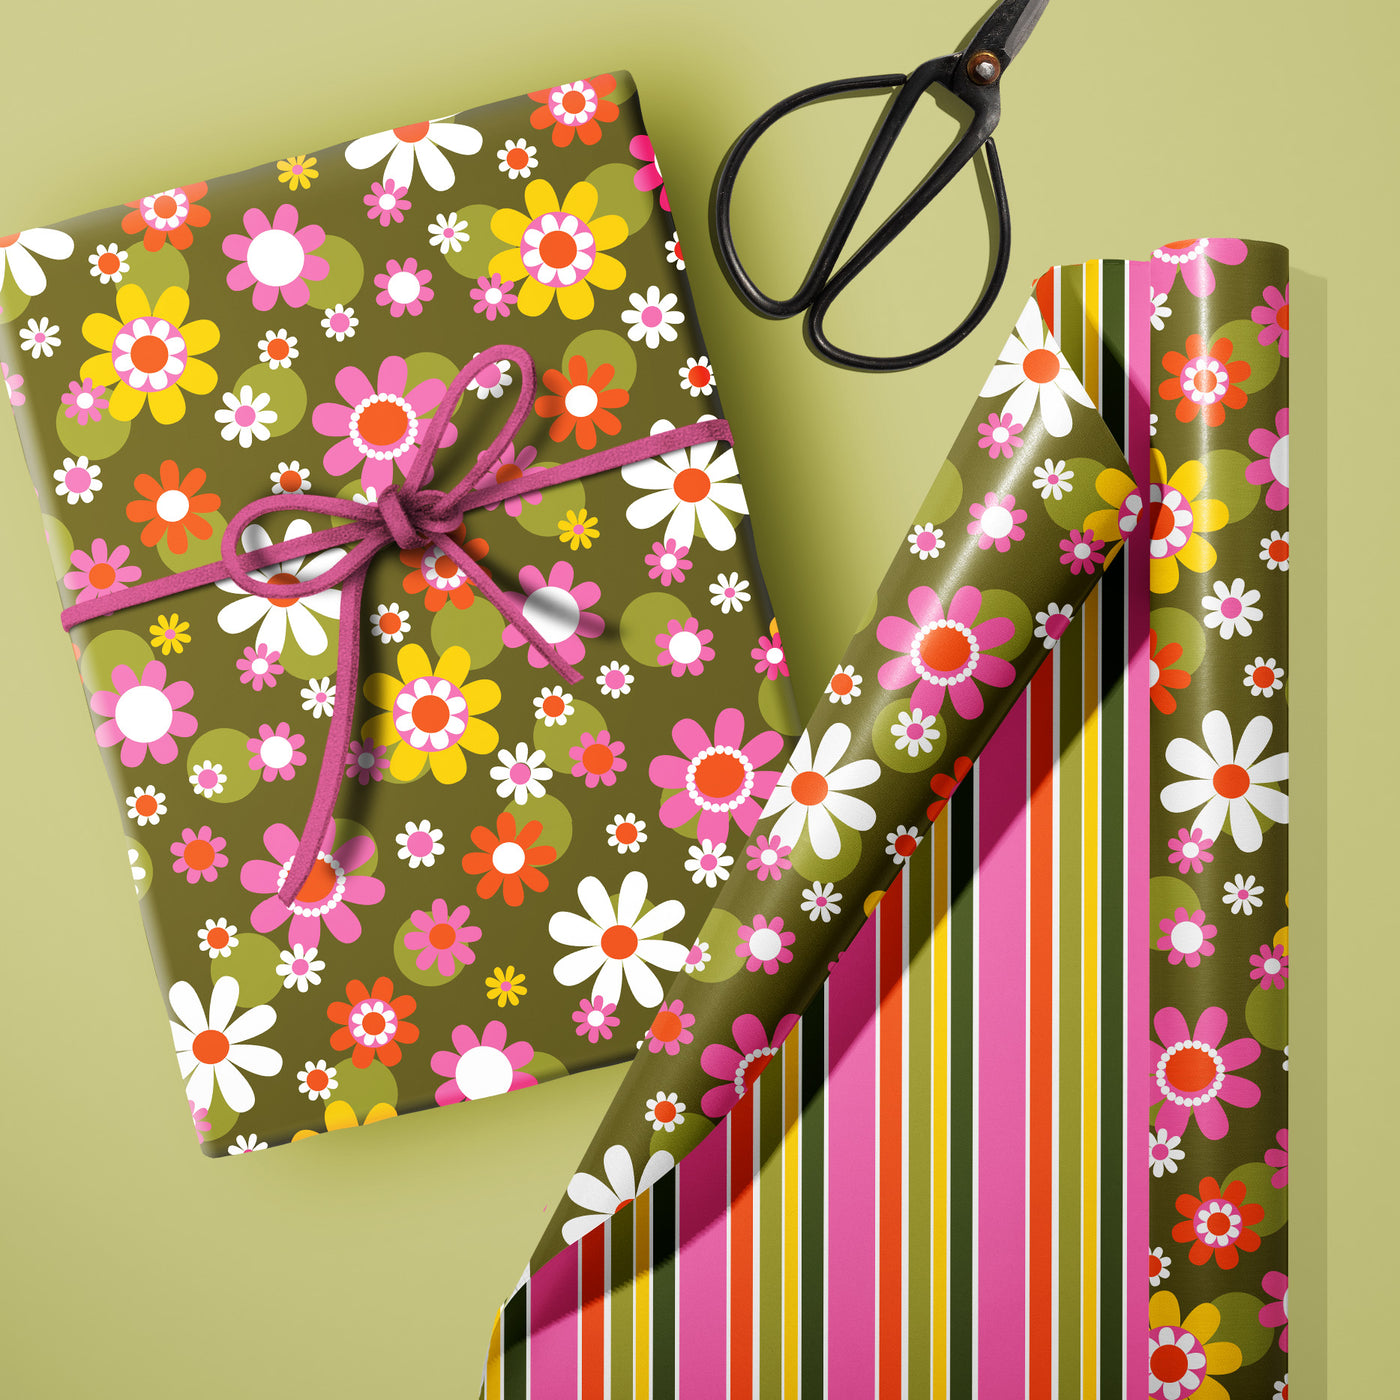 Groovy Florals Double Sided Gift Wrap Sheets